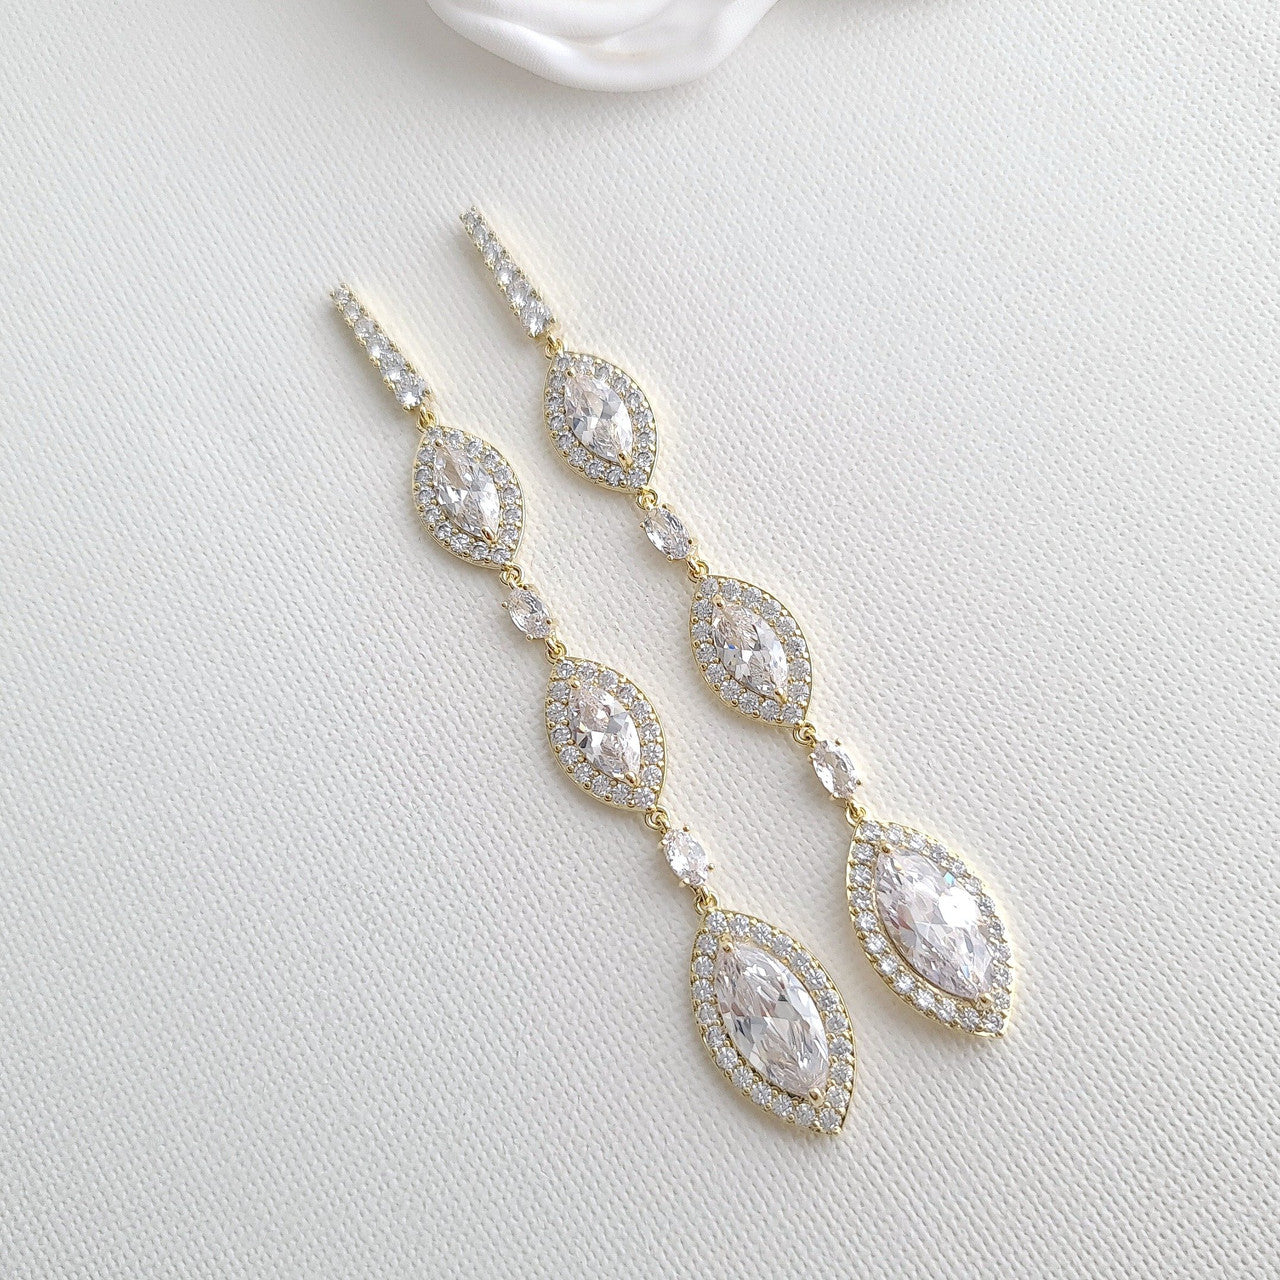 Extra Long Earrings for Wedding and Prom- Harriet